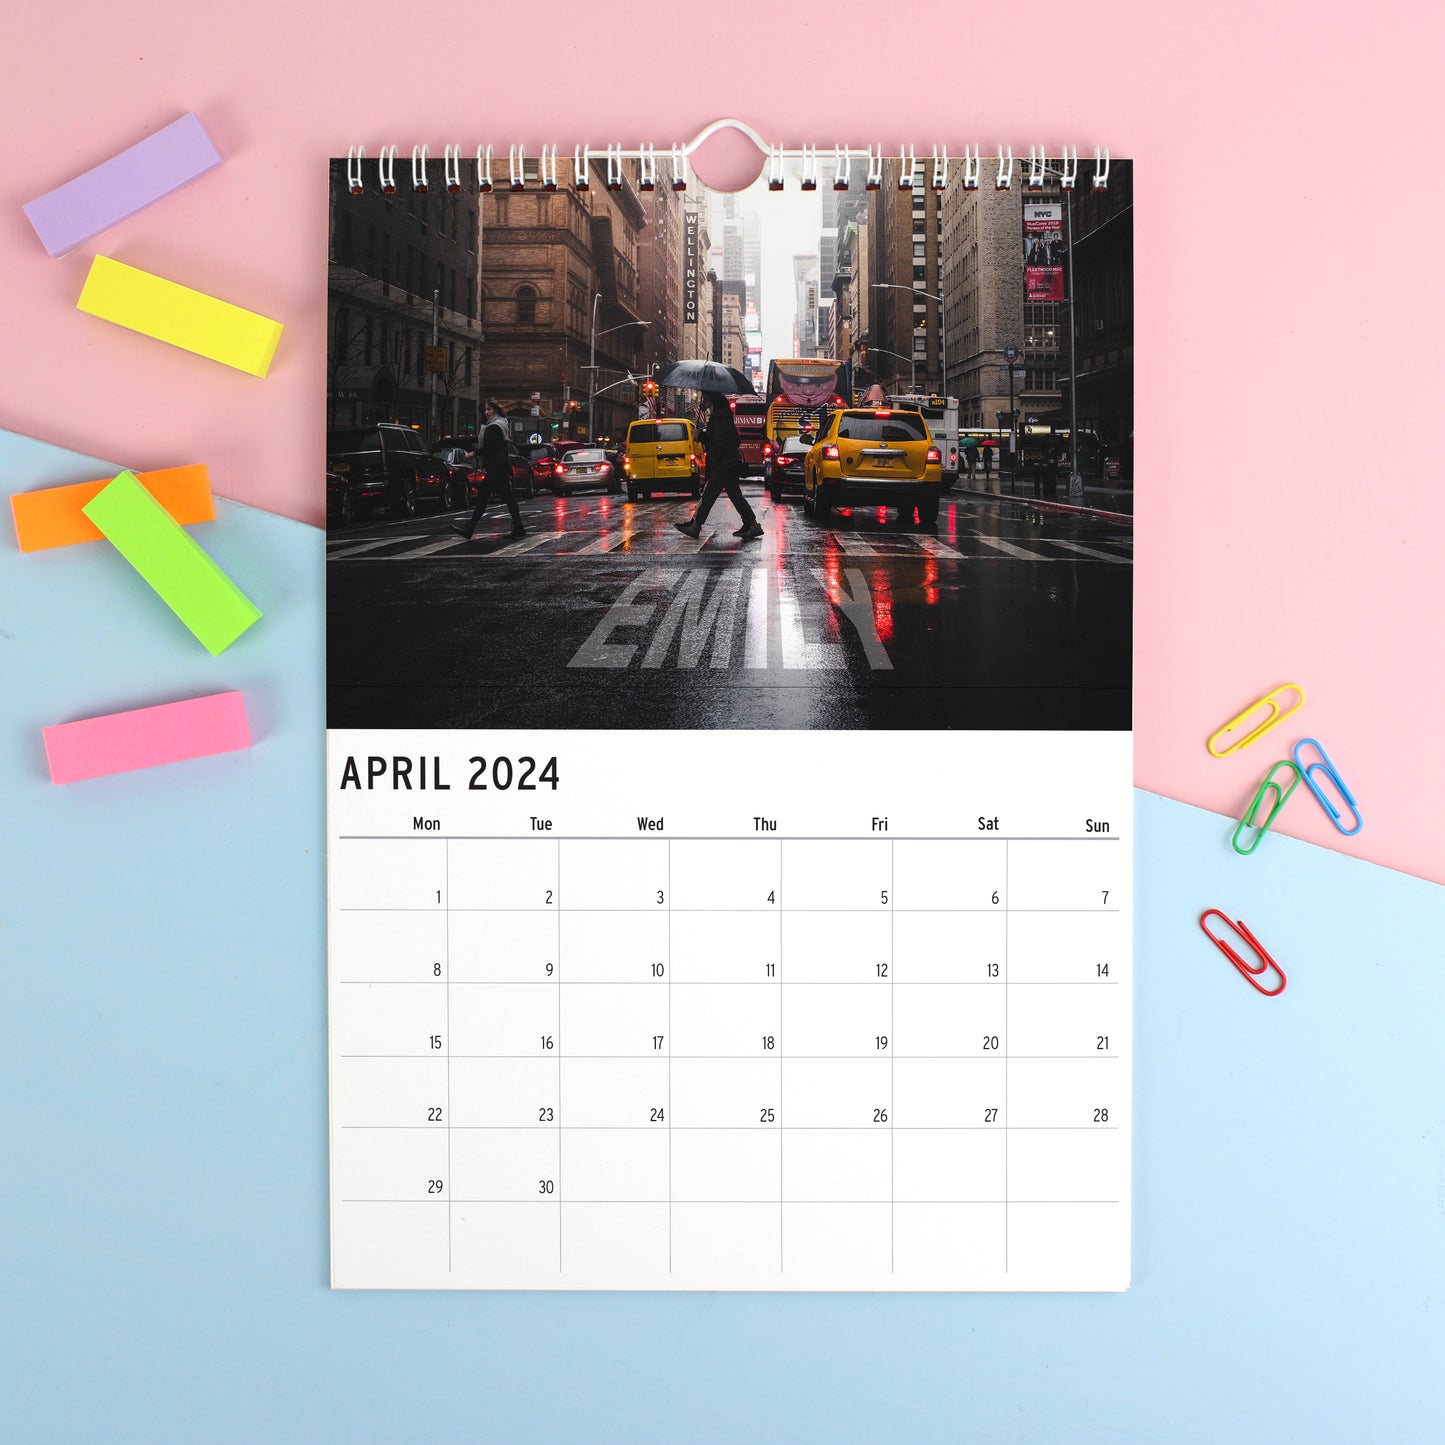 Personalised A4 New York Calendar - Personalise It!